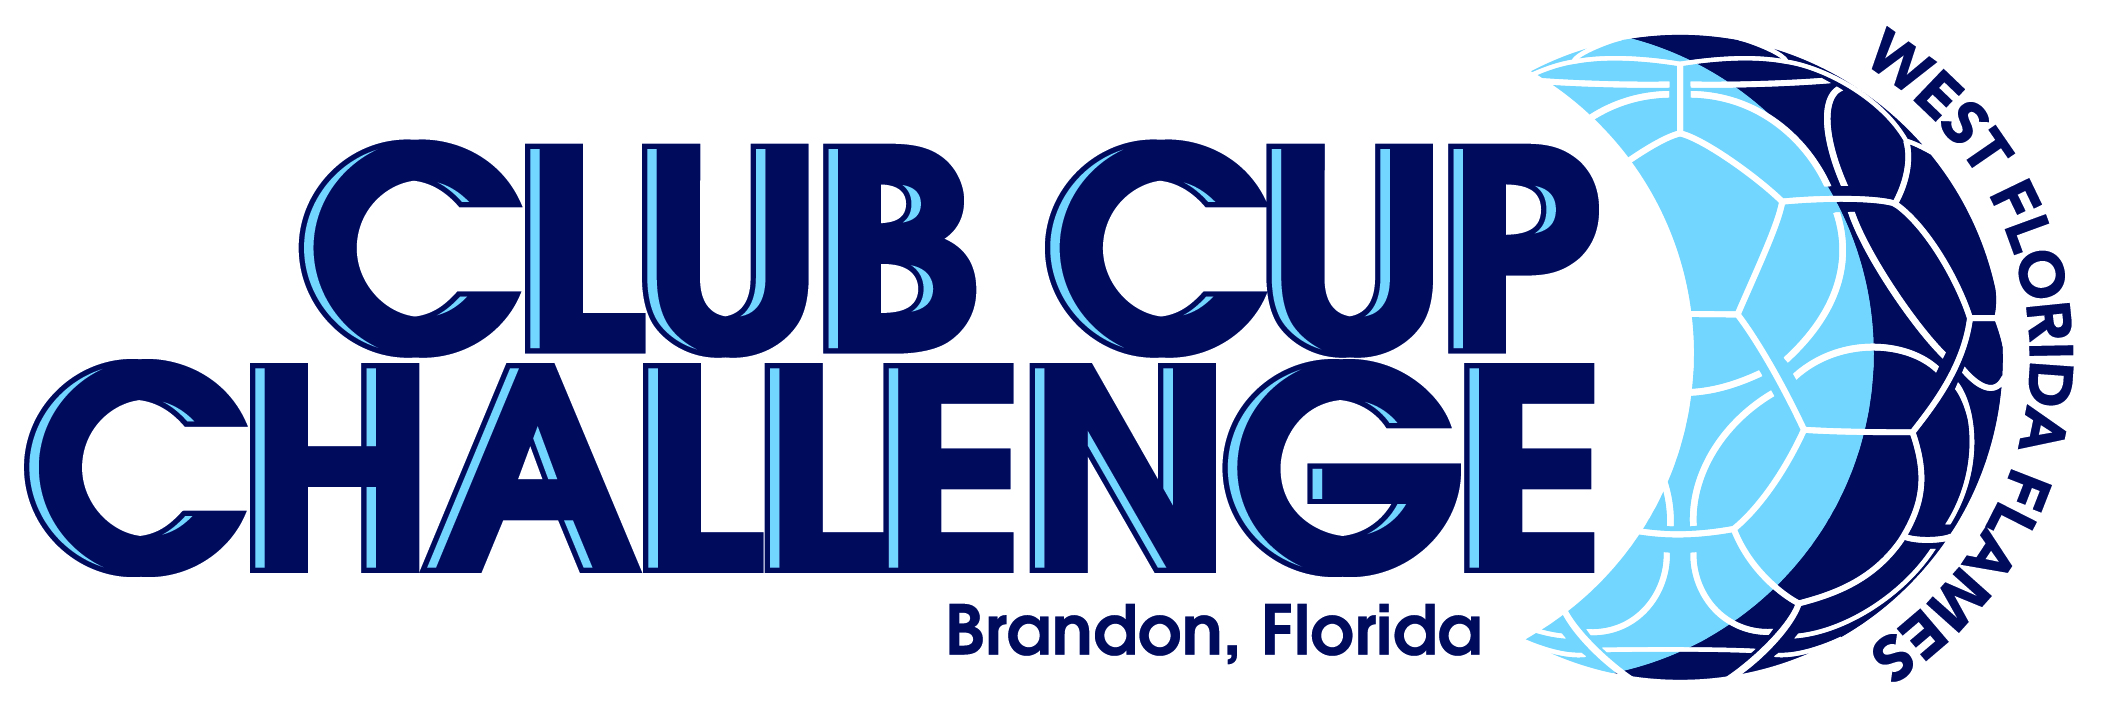 West Florida Flames Club Cup Challenge